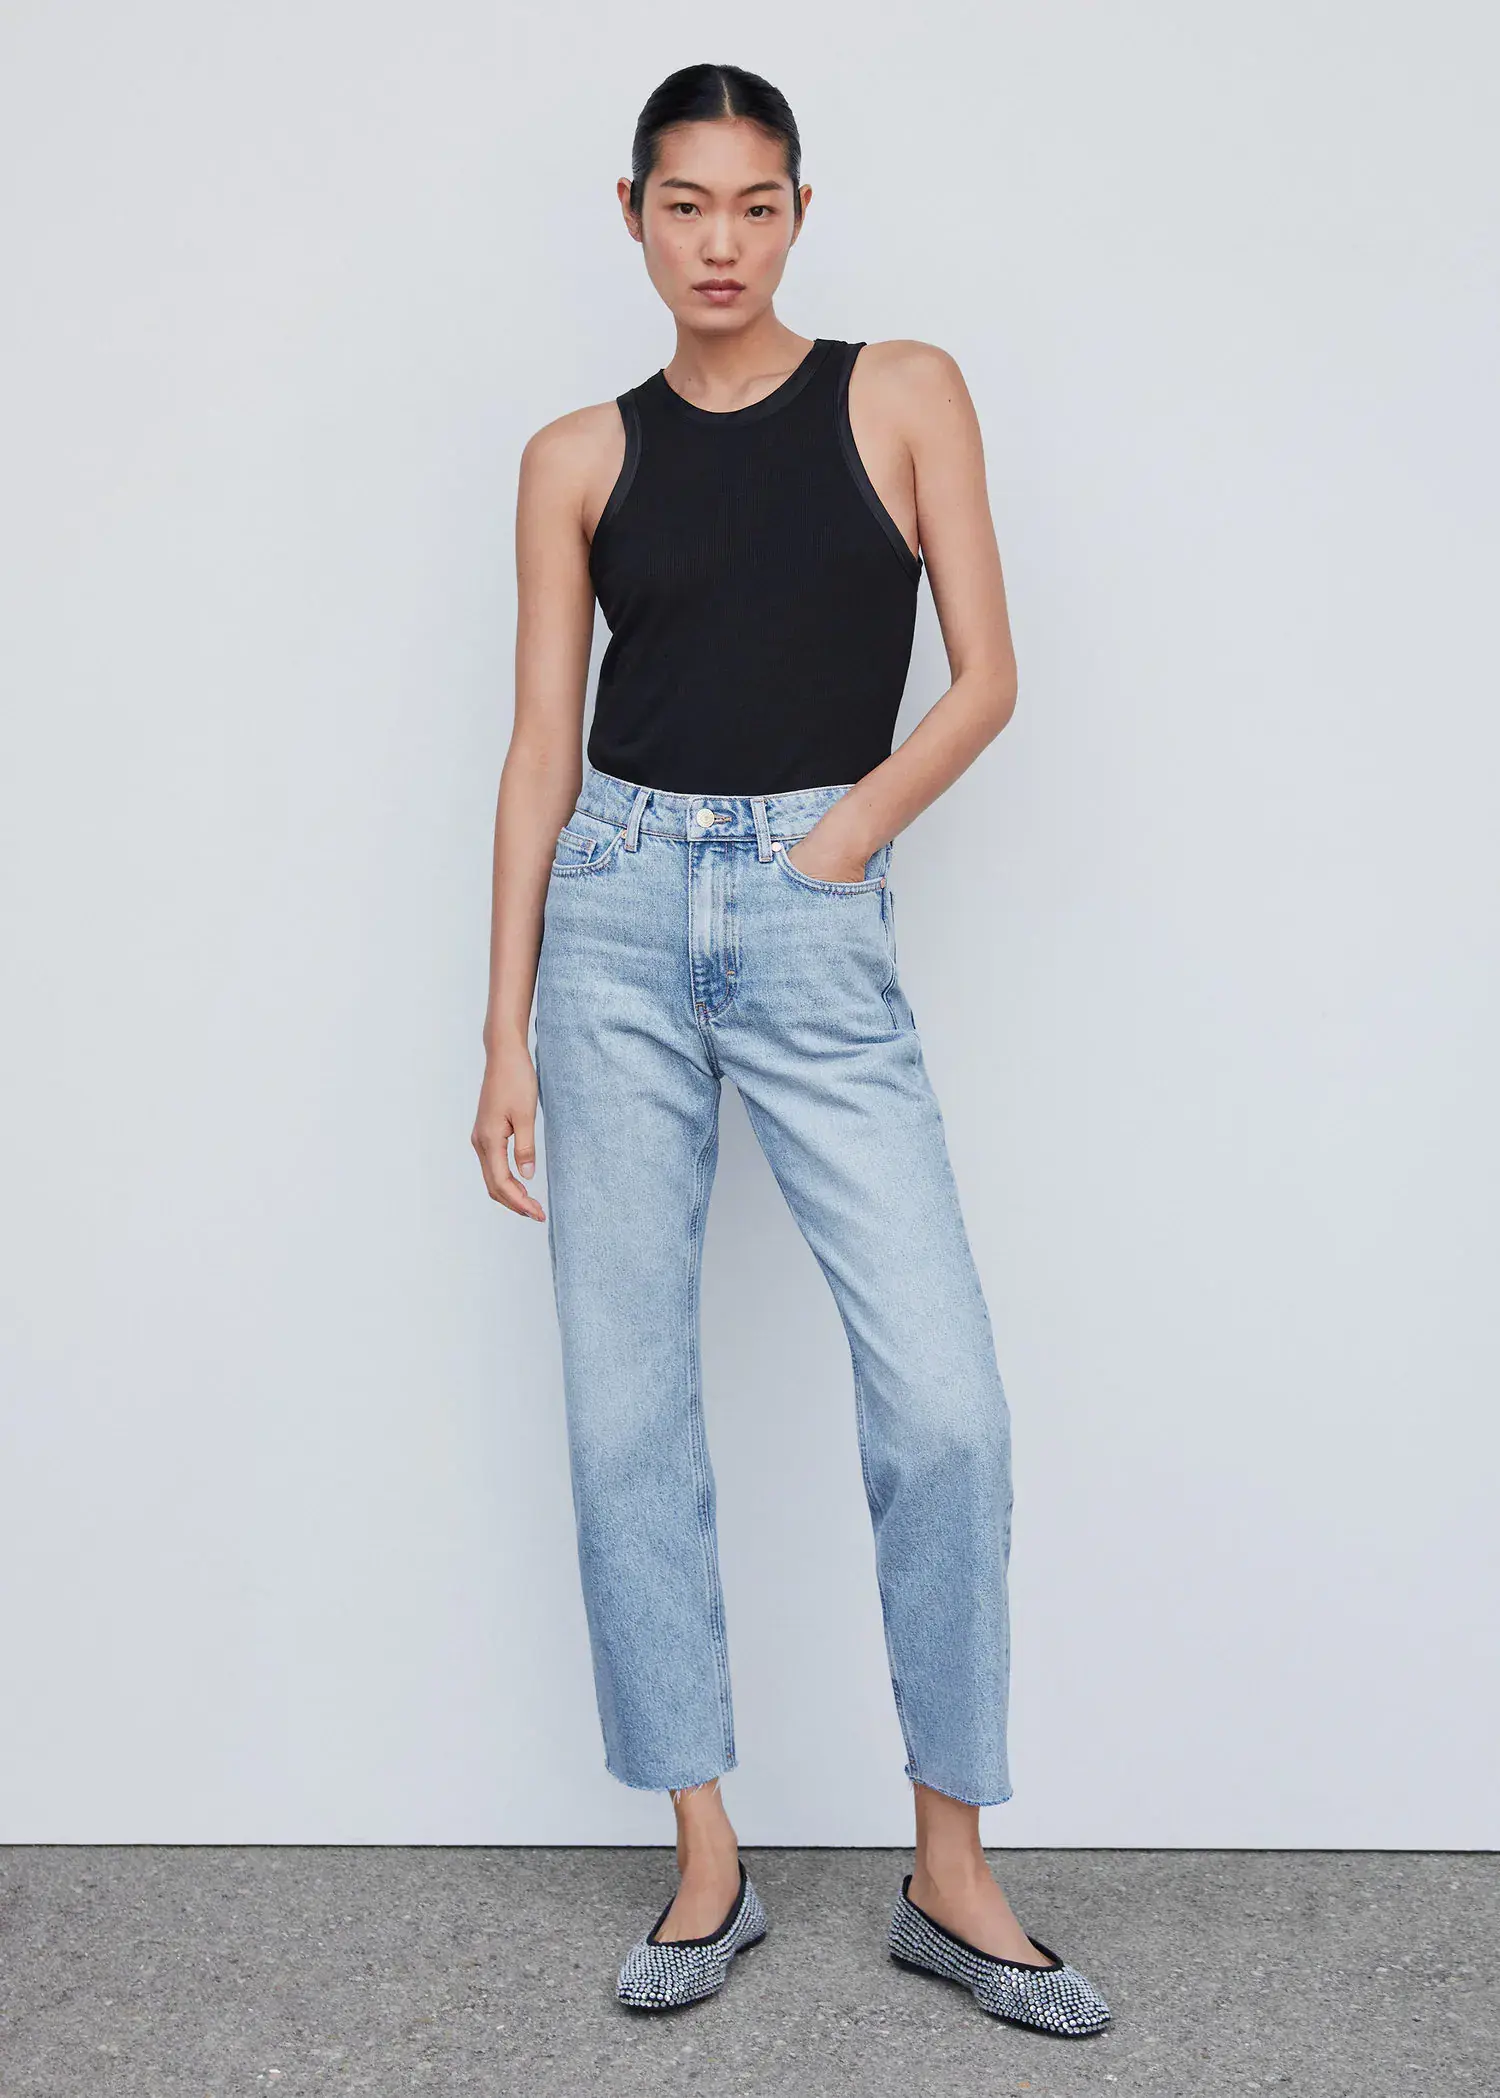 Mango High waist straight jeans. a woman in a black shirt and jeans. 